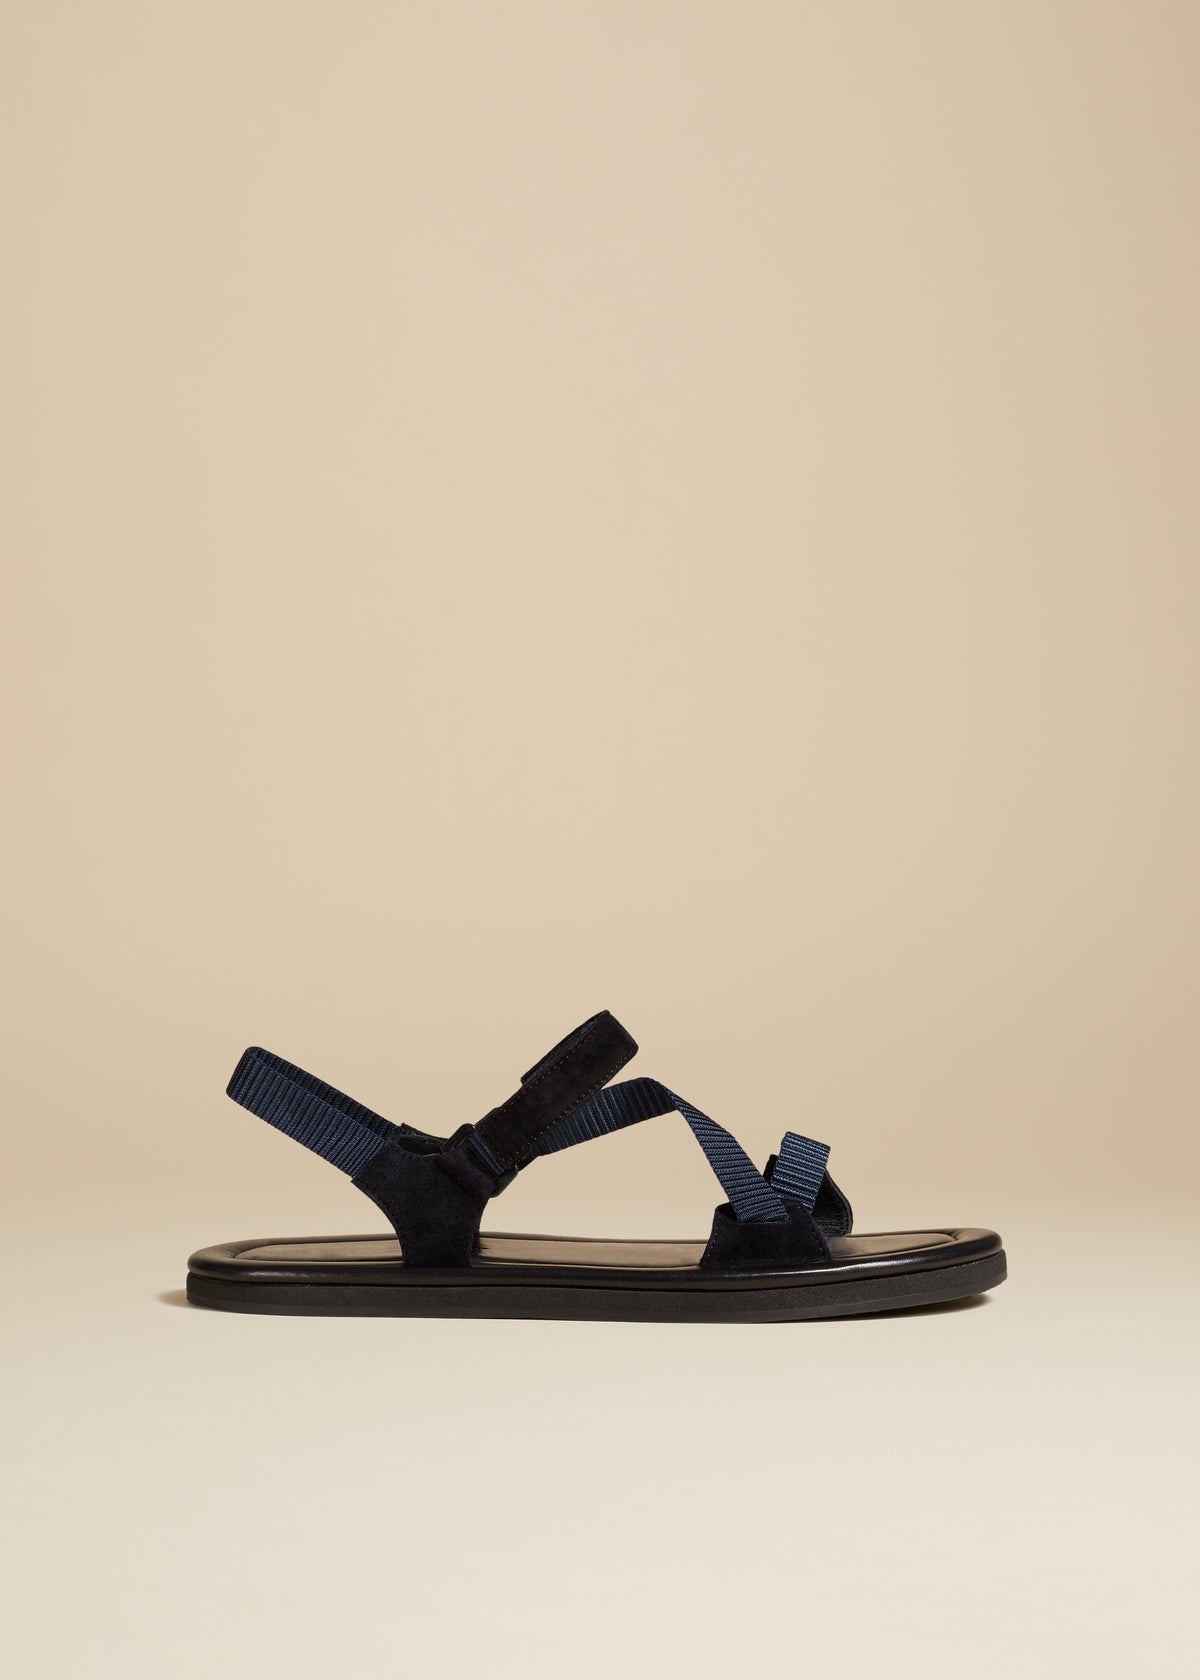 The Hacker Sandal in Navy and Black - 1